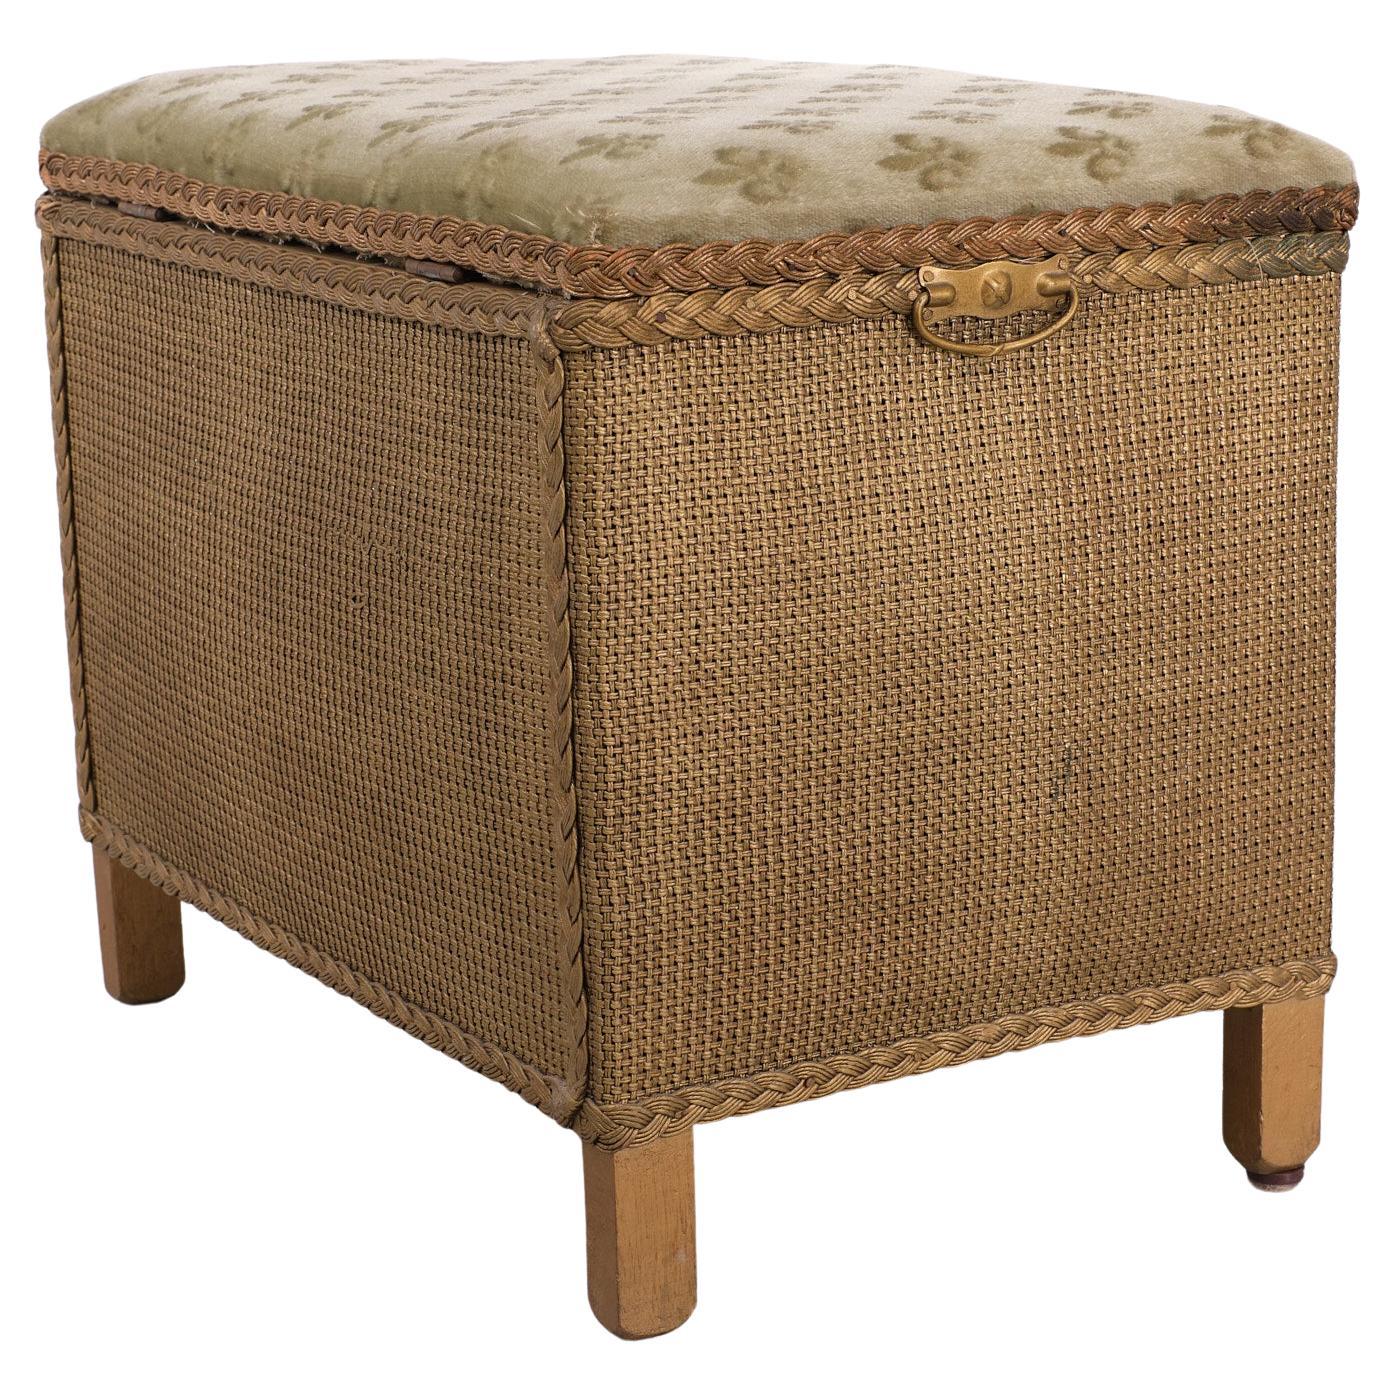 Very nice Loyd Loom storage box . Also very useful for a extra seating place .Original Green Wool upholstery  .France Lely decor .Two handles on the sides and on the front . Gold color base . 